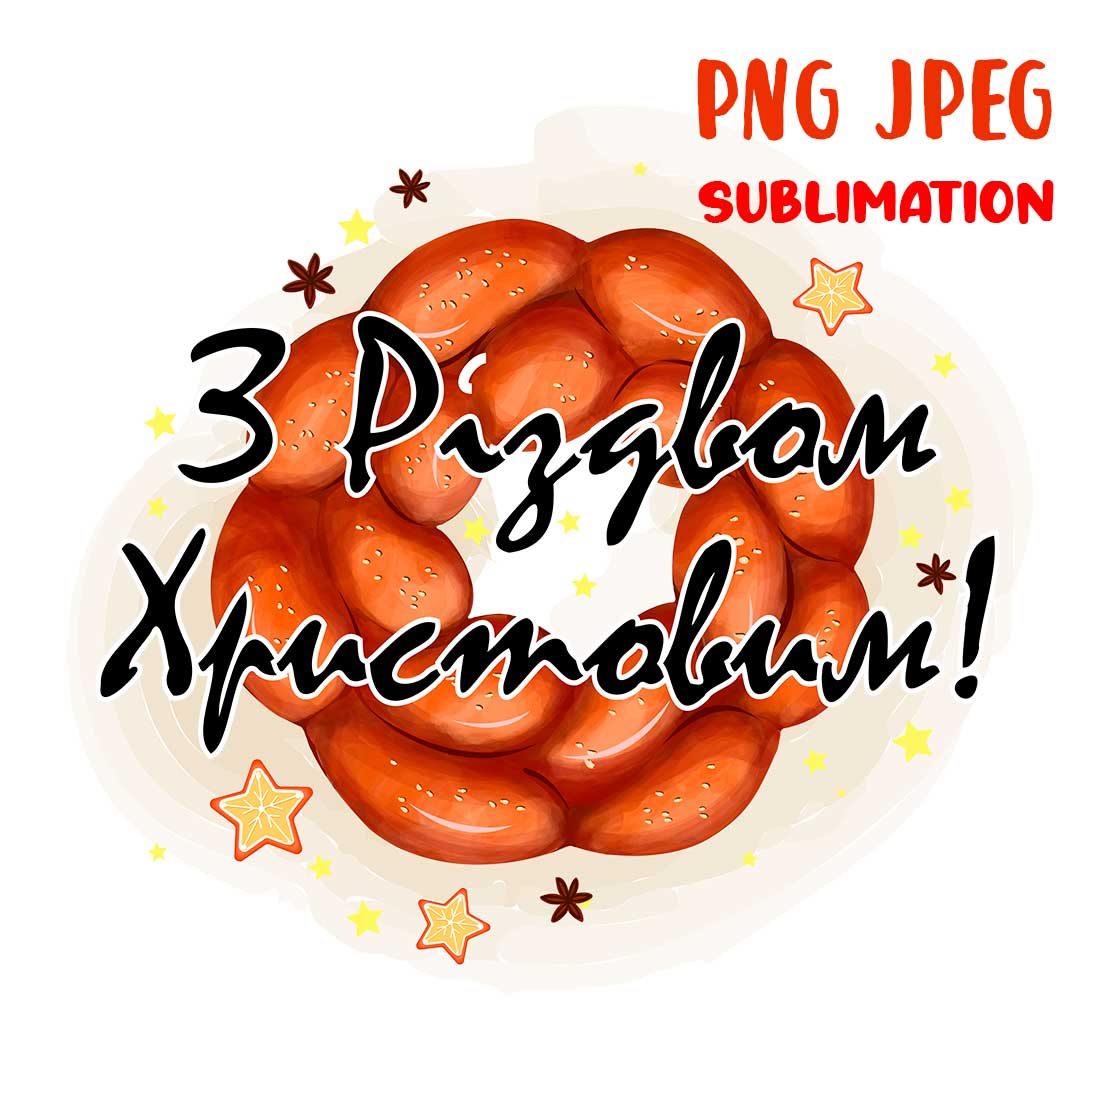 Christmas Baking PNG Sublimation main cover.